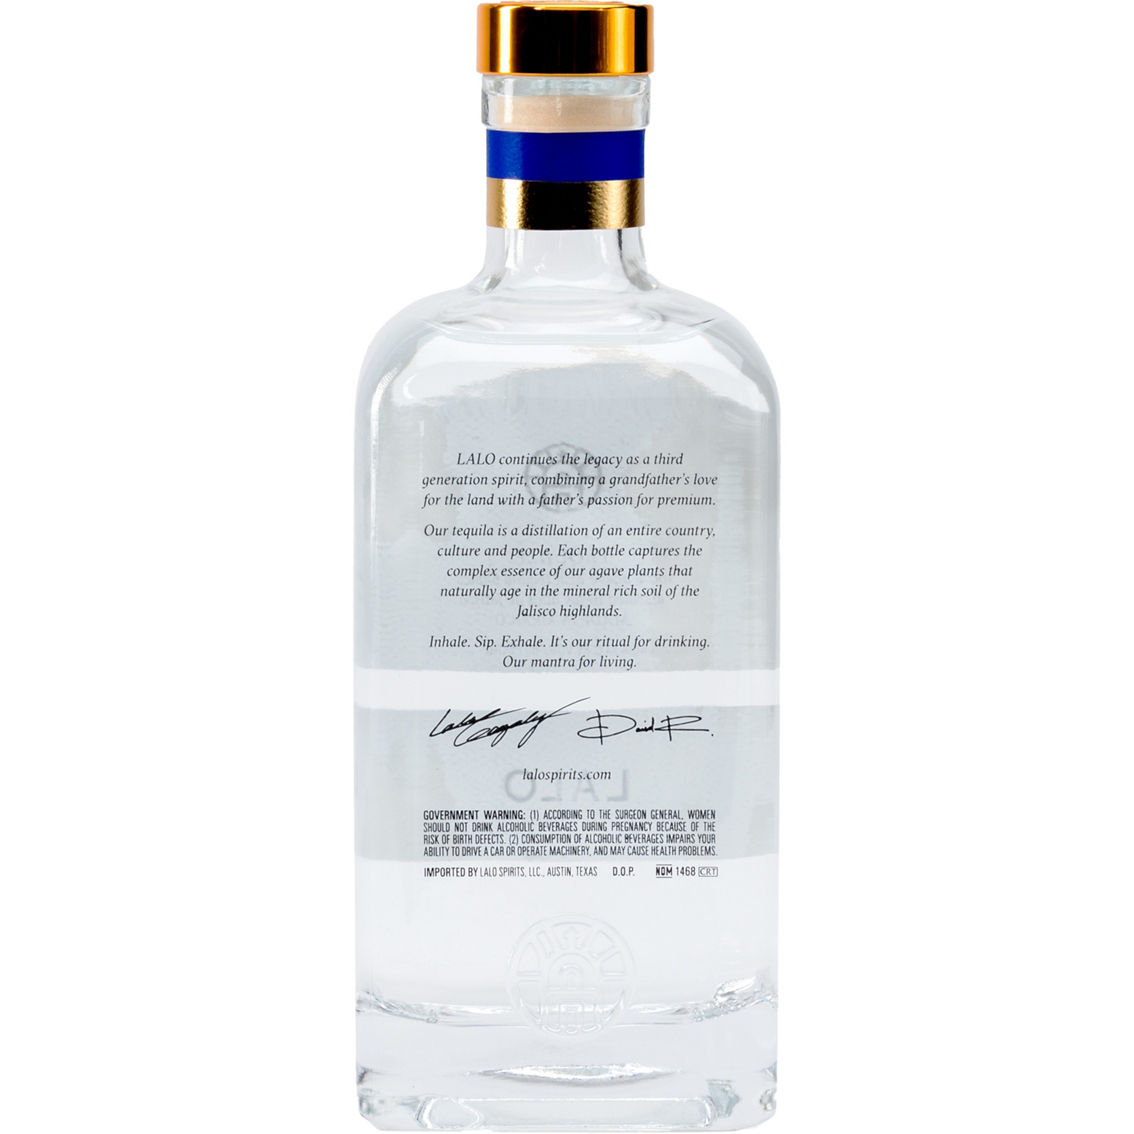 LaLo Blanco Tequila, 750ml - Image 2 of 2